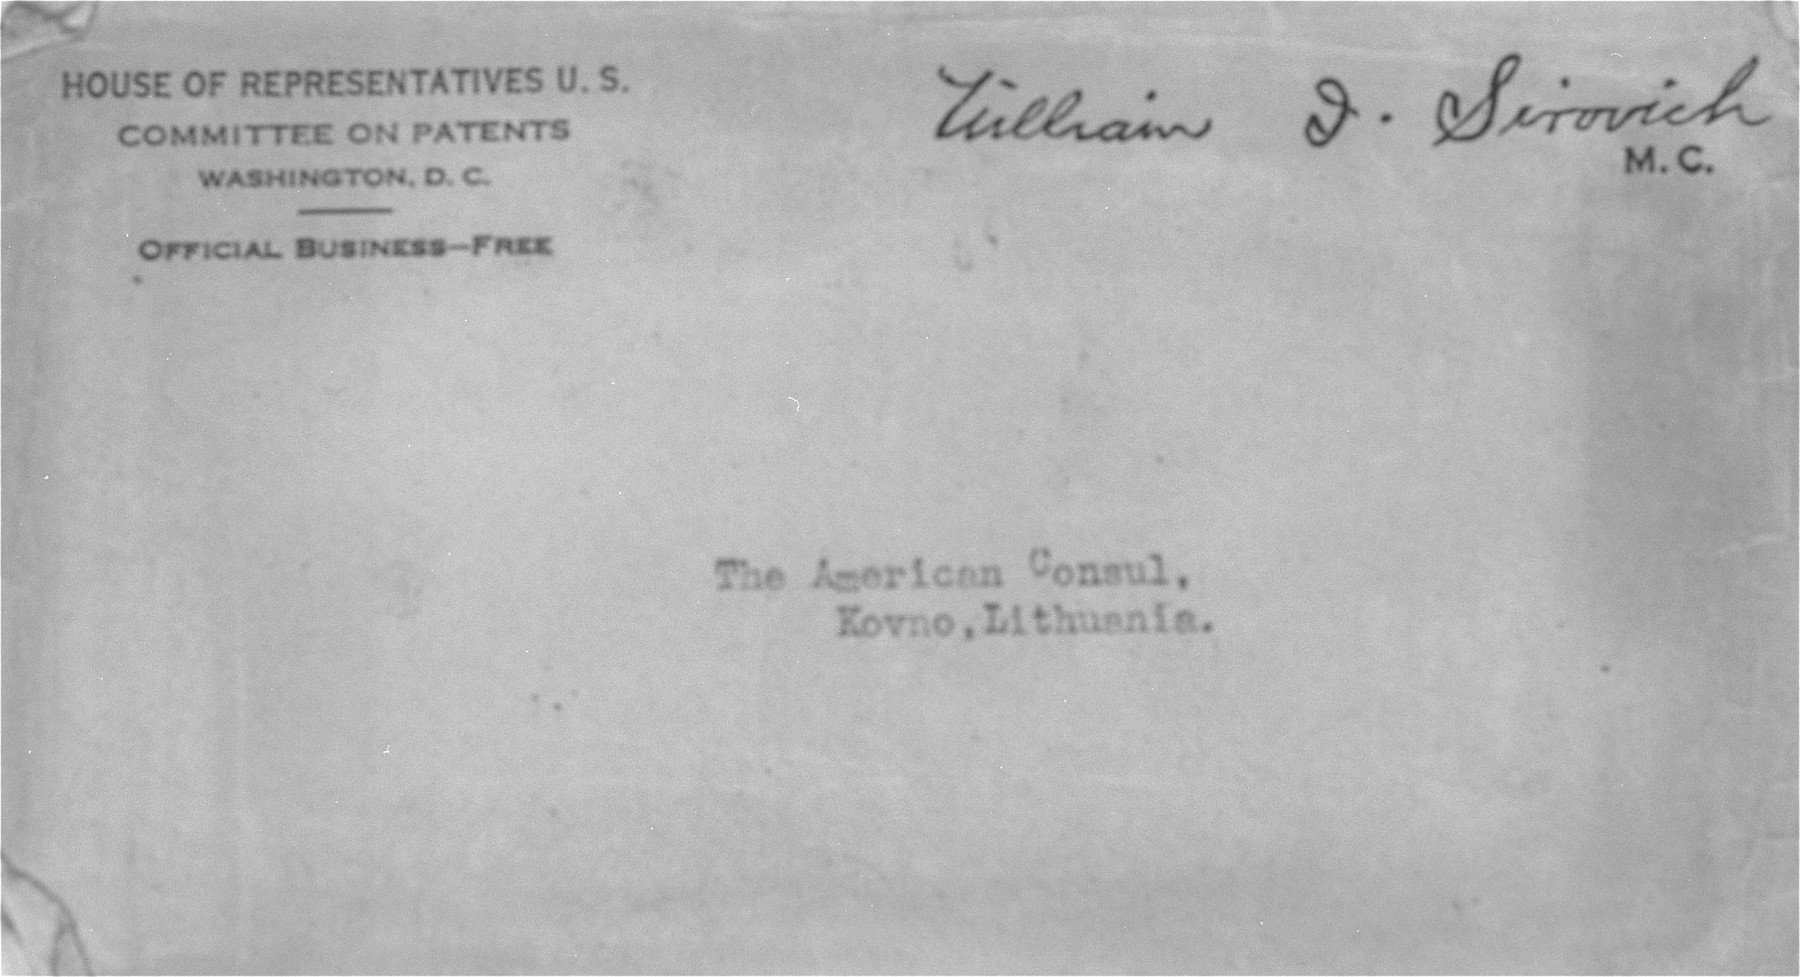 Envelope for the letter of support sent by Congressman William I. Sirovich of New York to the American Consul in Kovno in support of the visa application of Eliezer Kaplan.